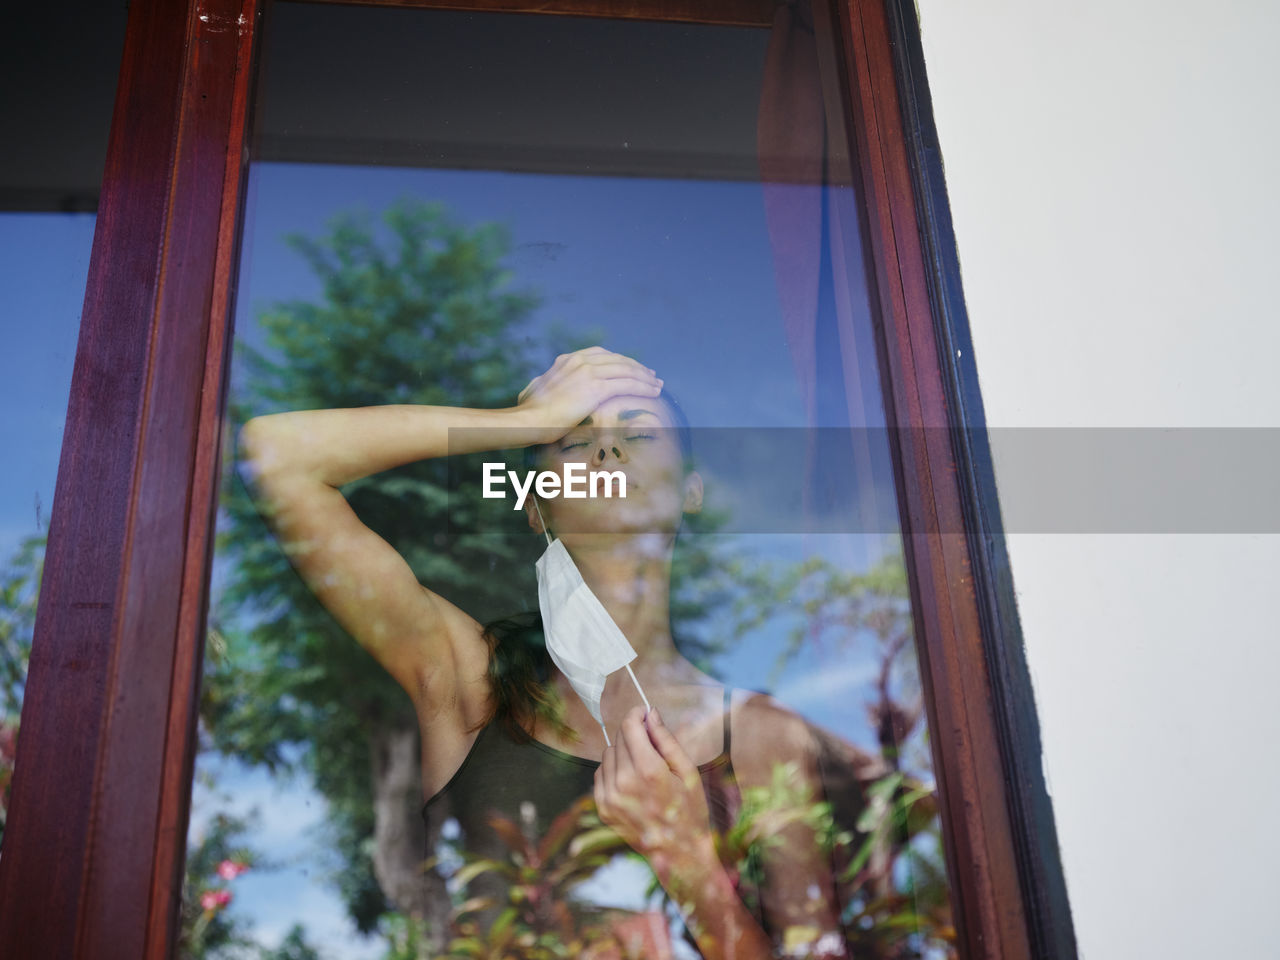 LOW ANGLE PORTRAIT OF YOUNG WOMAN AGAINST SKY SEEN THROUGH WINDOW